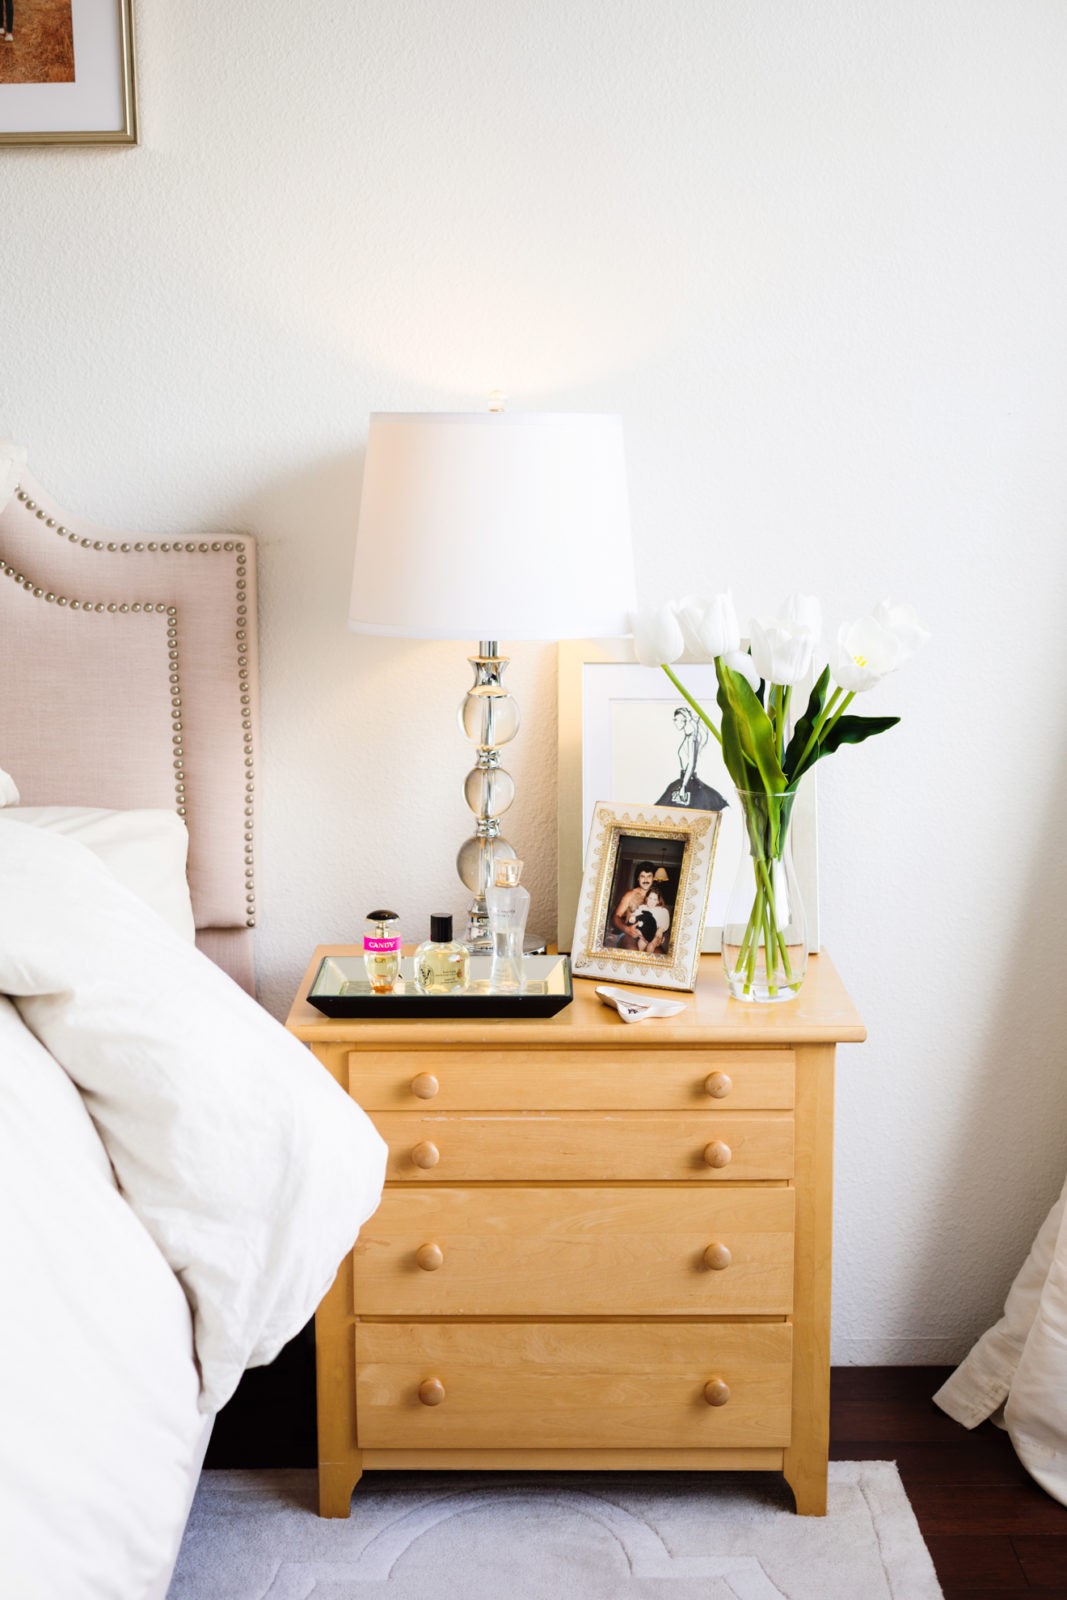 How to Give Your Home a Winter Refresh After the Holidays by Home Decor Blogger Laura Lily,